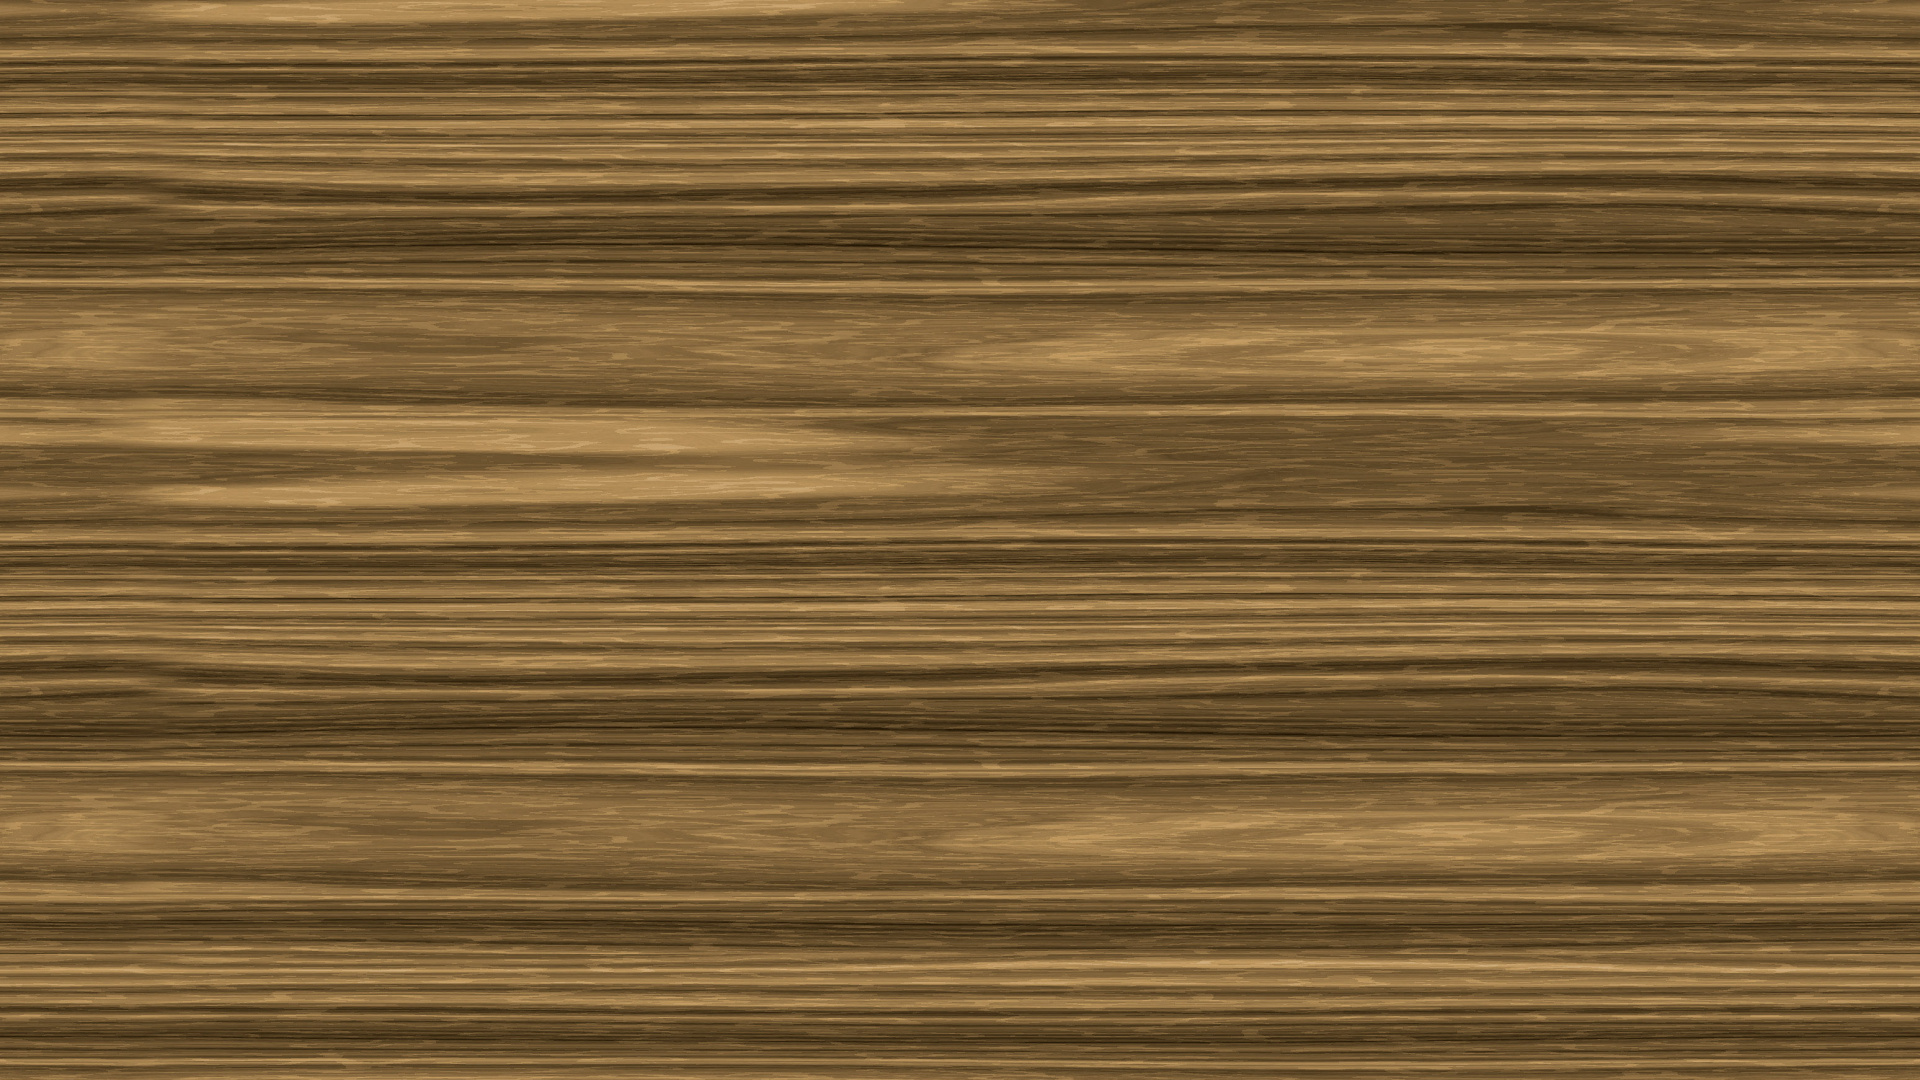 Brown and Black Wooden Surface. Wallpaper in 1920x1080 Resolution